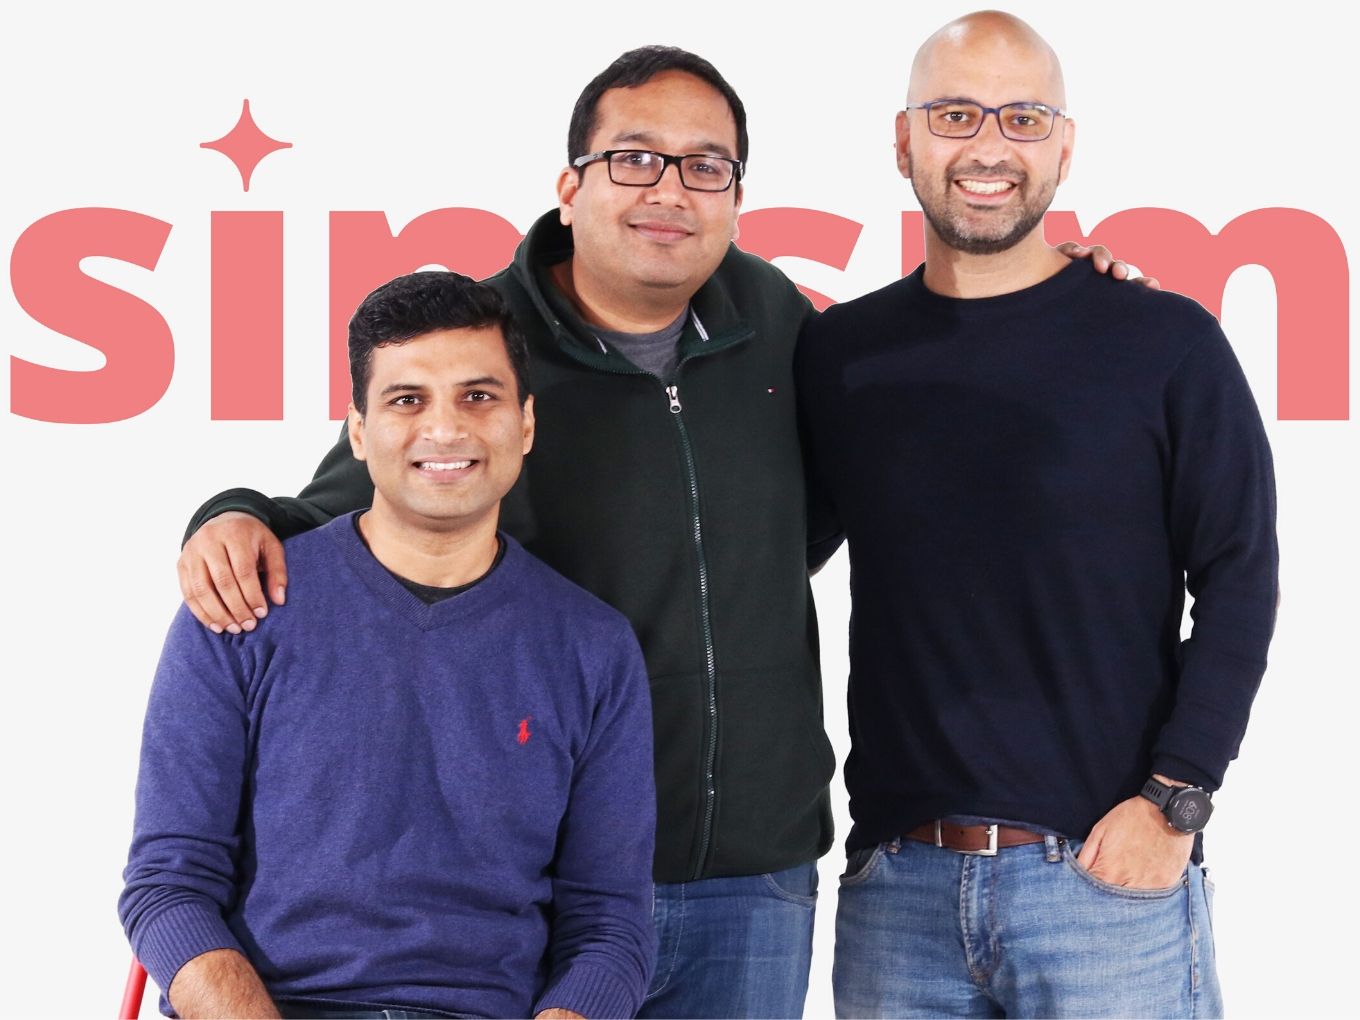 SimSim Bags Series B To Expand Video Commerce Play, Build Influencer Community